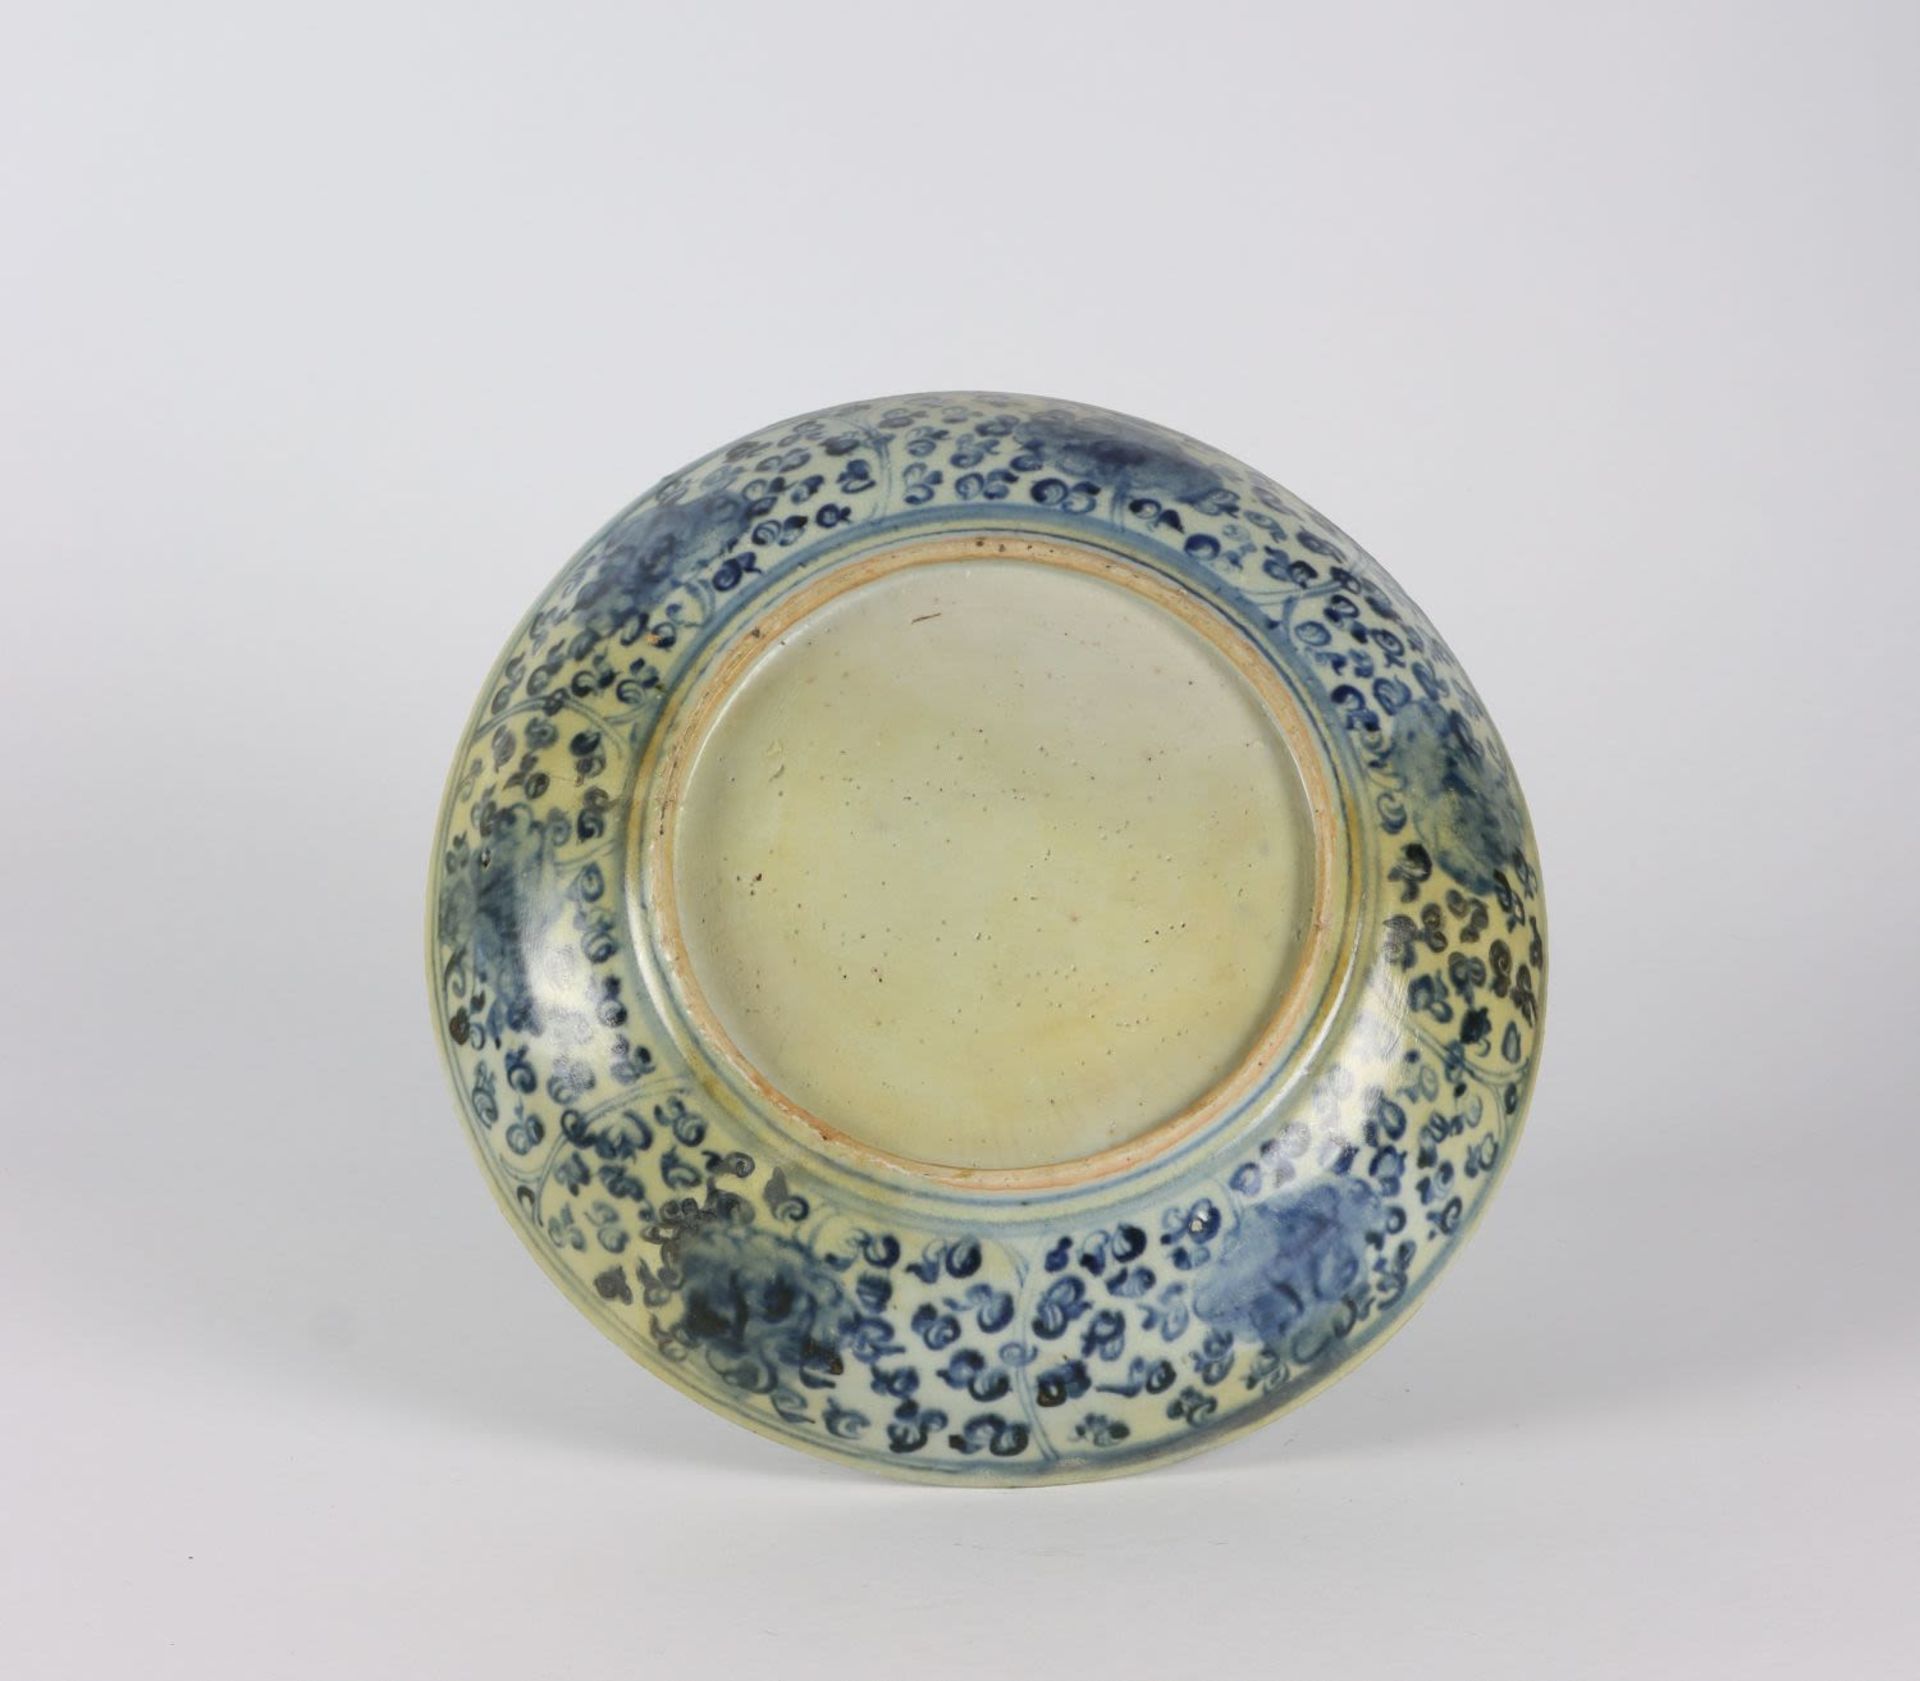 A Chinese Hongzhi, Ming Dynasty peacock dish, late 15th Century - Image 2 of 2